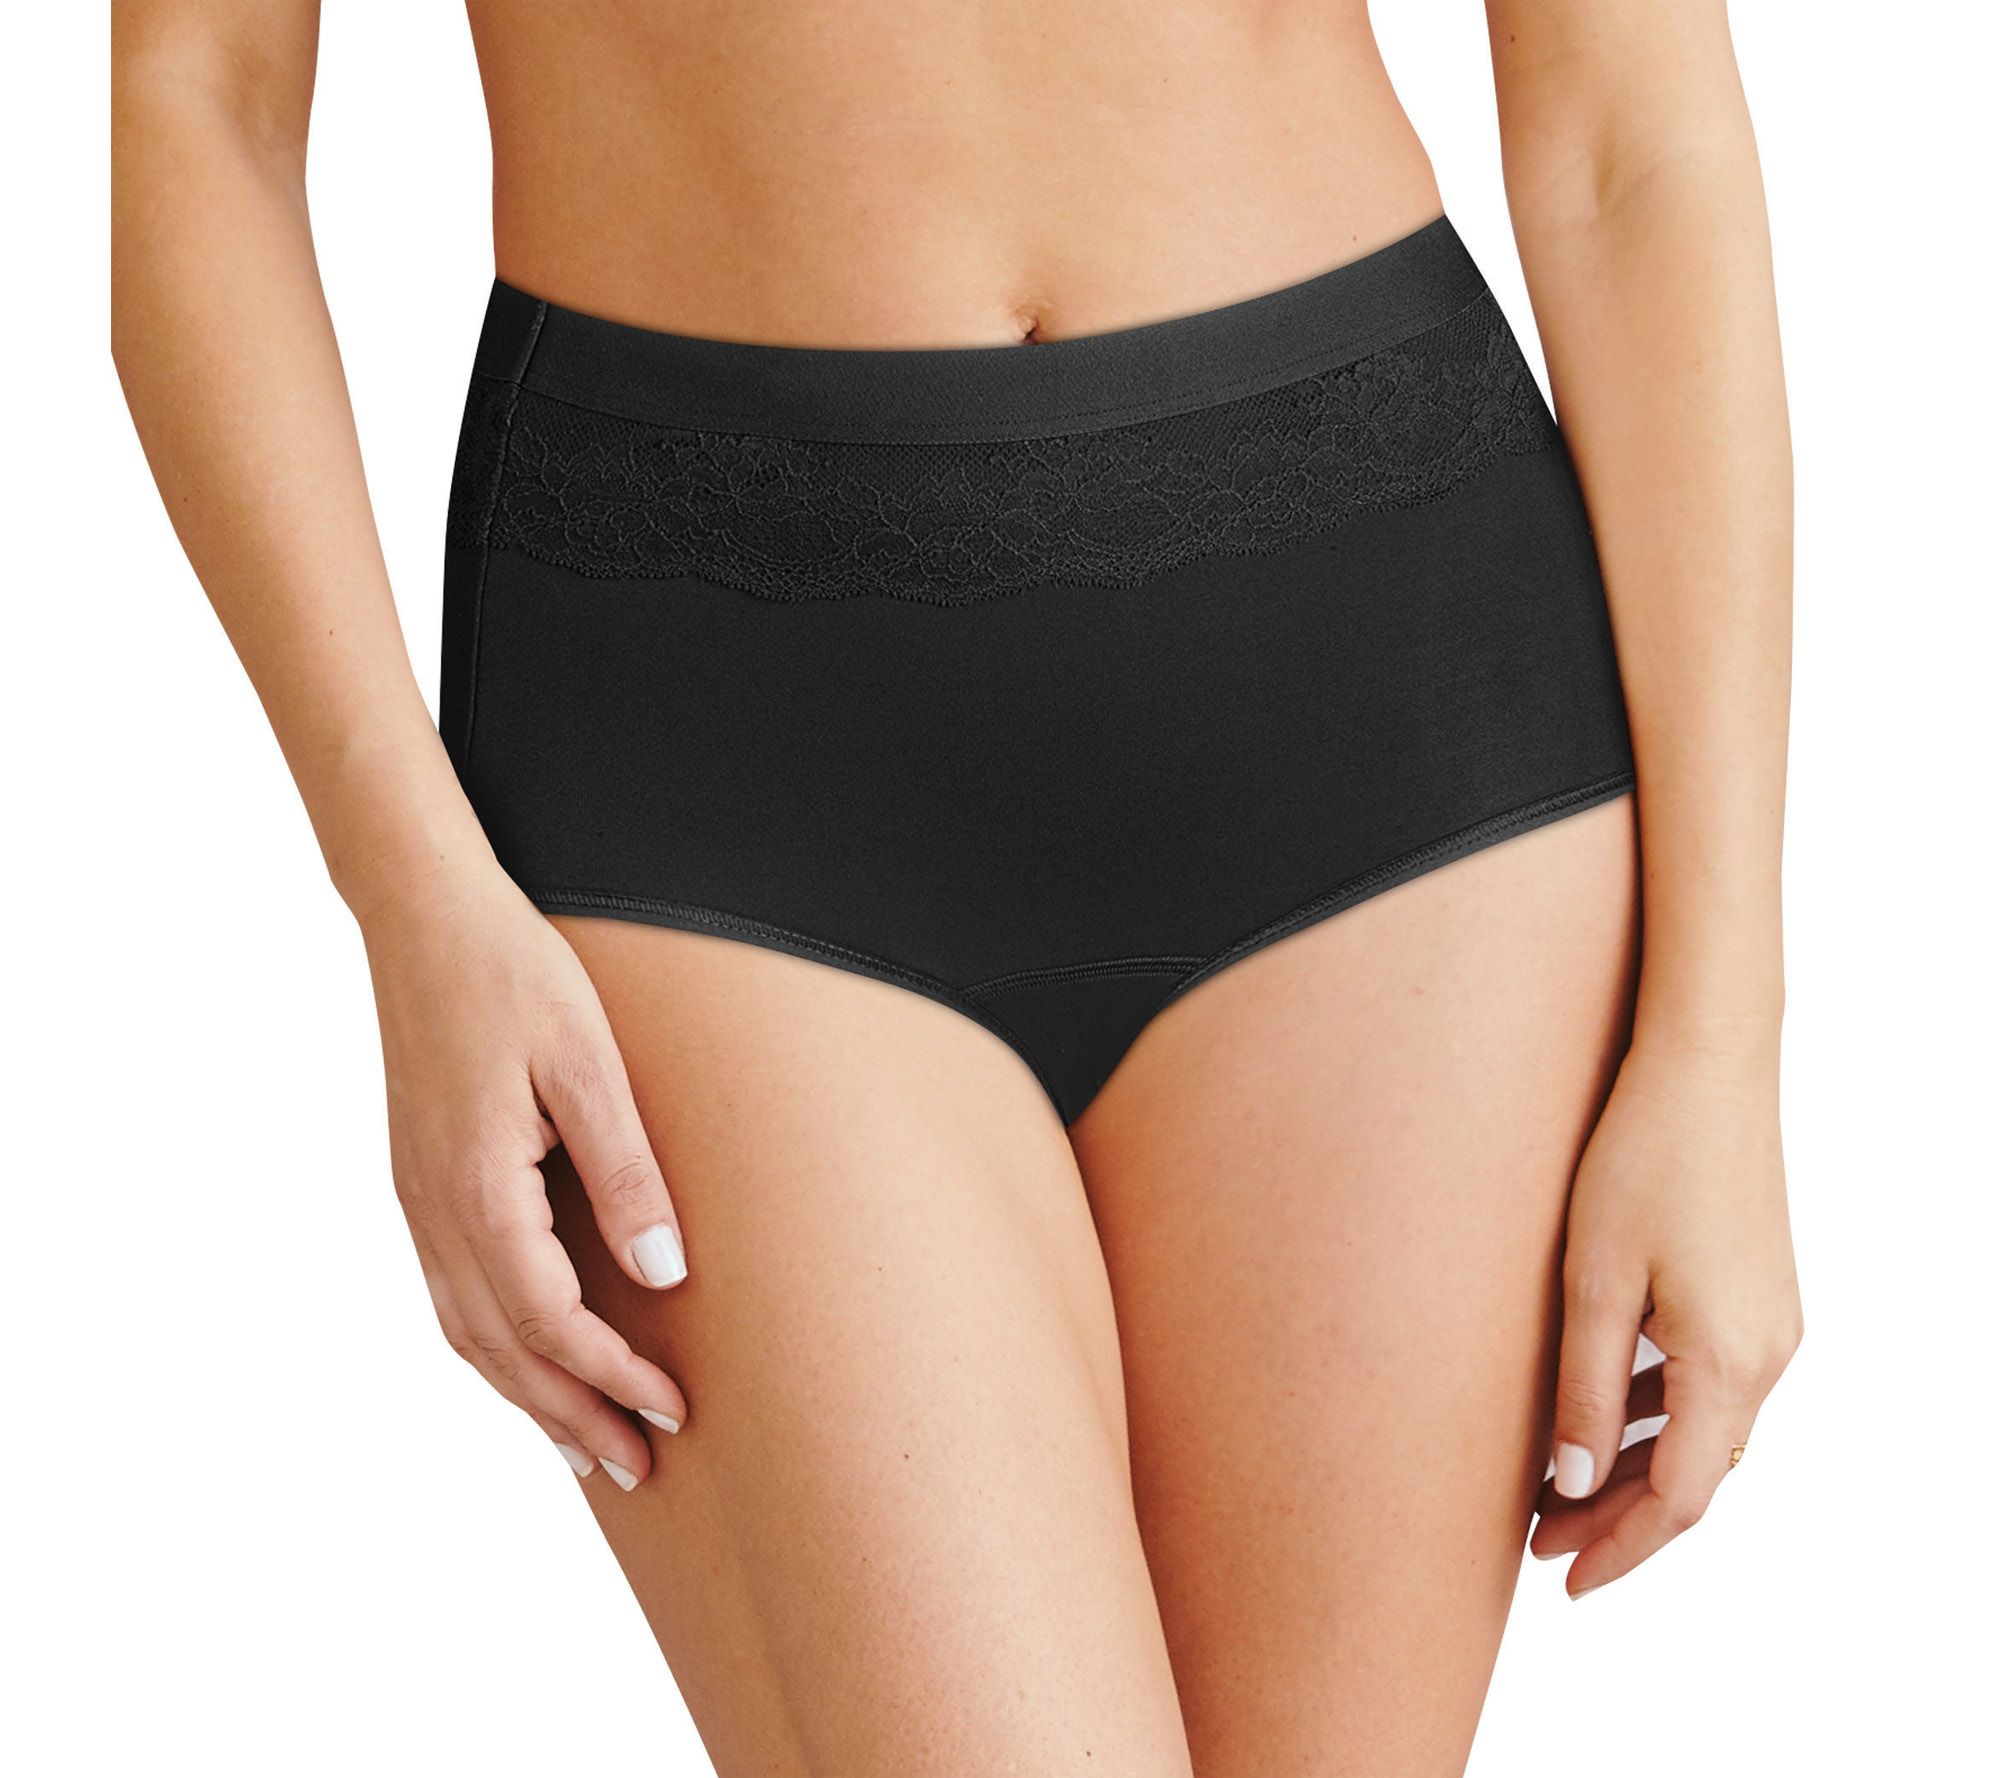 Bali Beautifully Confident S/3 Leak Protection Brief Panties 